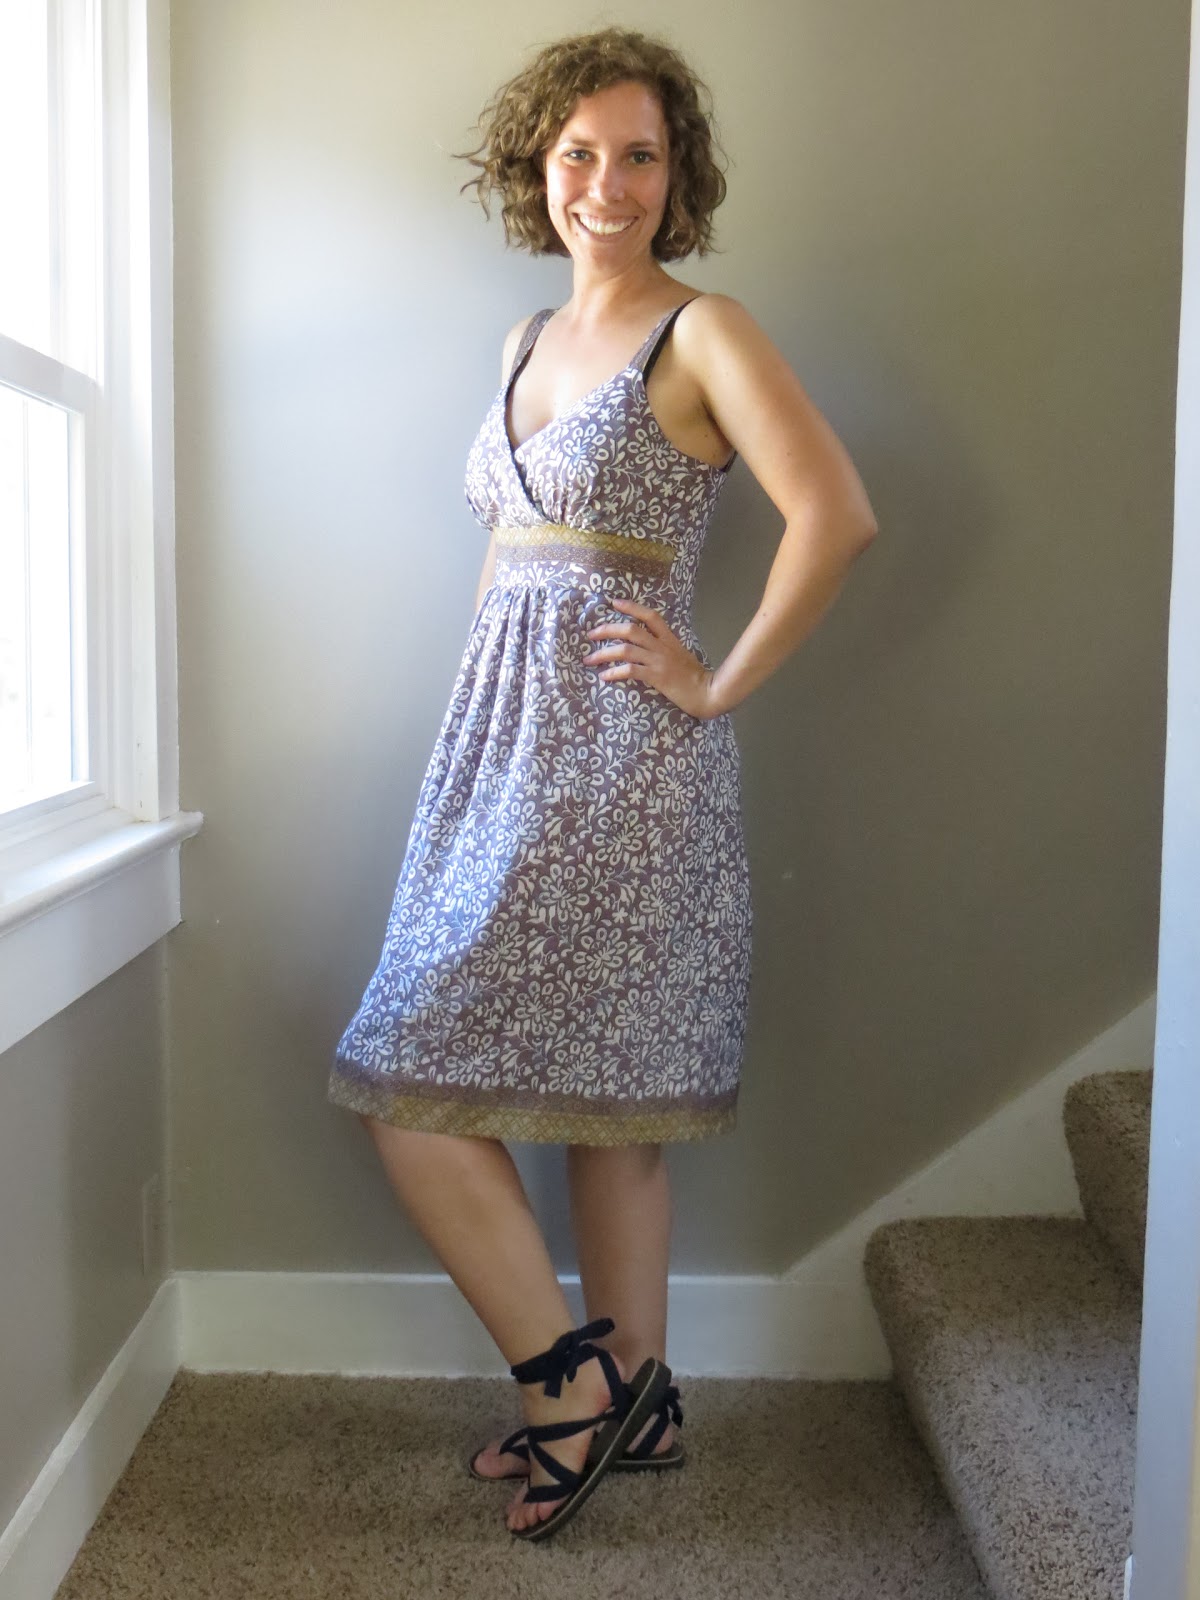 Sew Get Dressed: The Boho-Chic Ann Arbor Sun Dress - Completed!